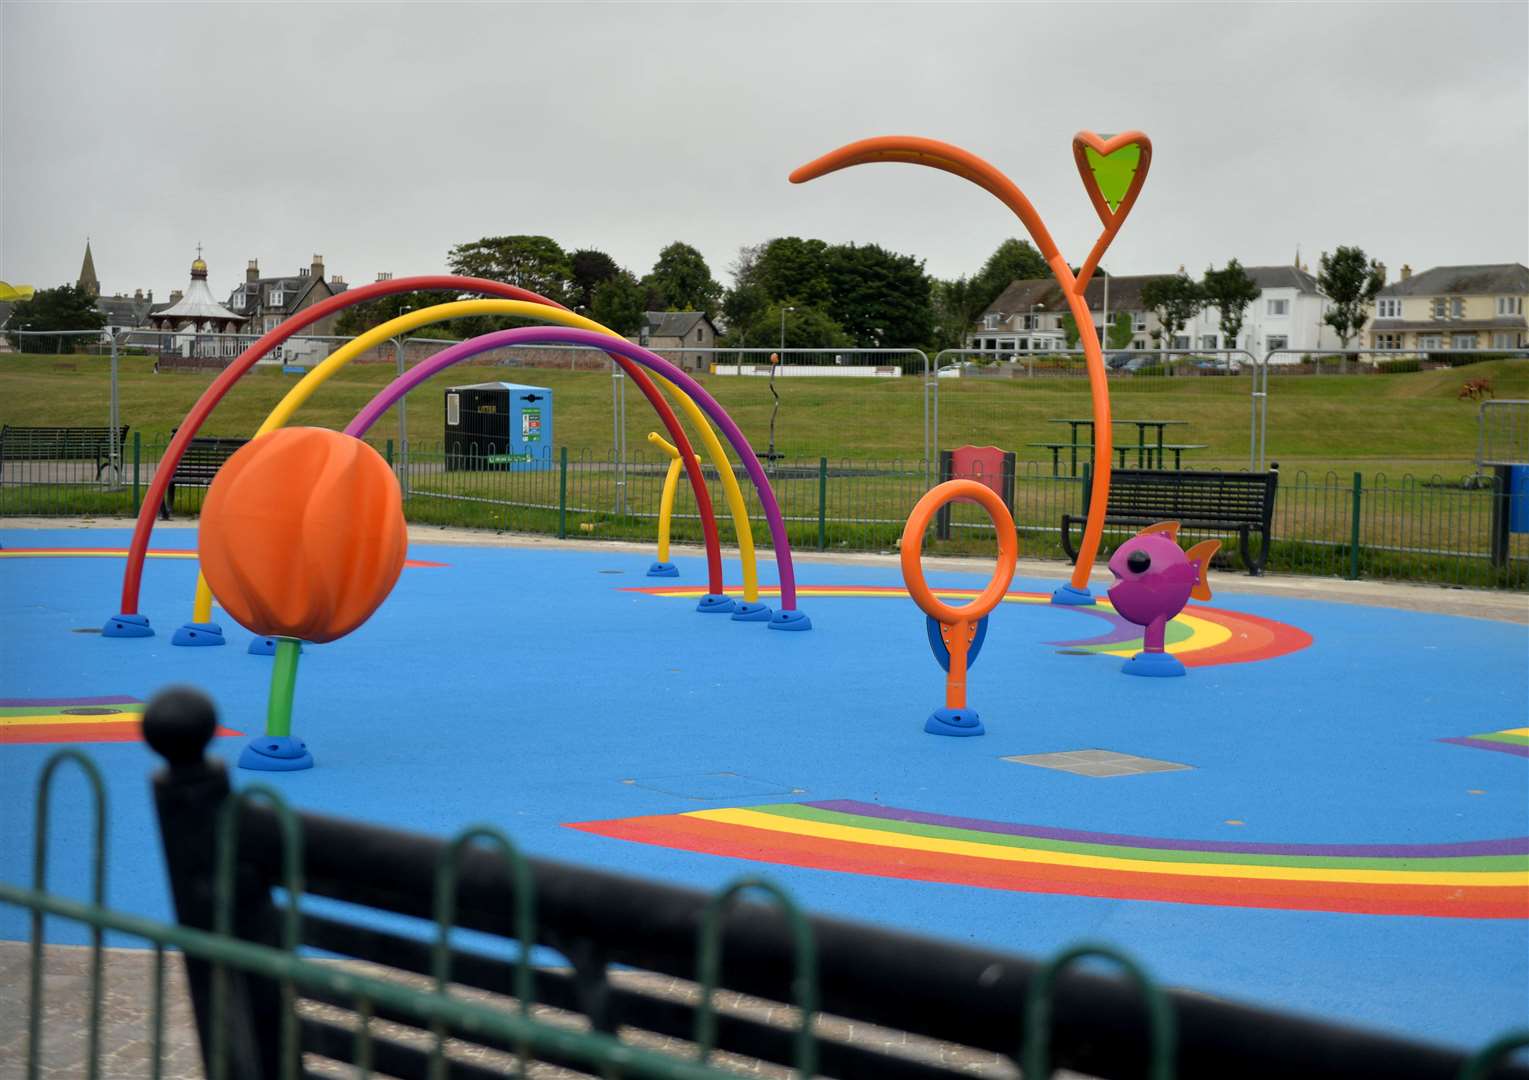 The splash pad is a bright new addition to the seafront at Nairn.